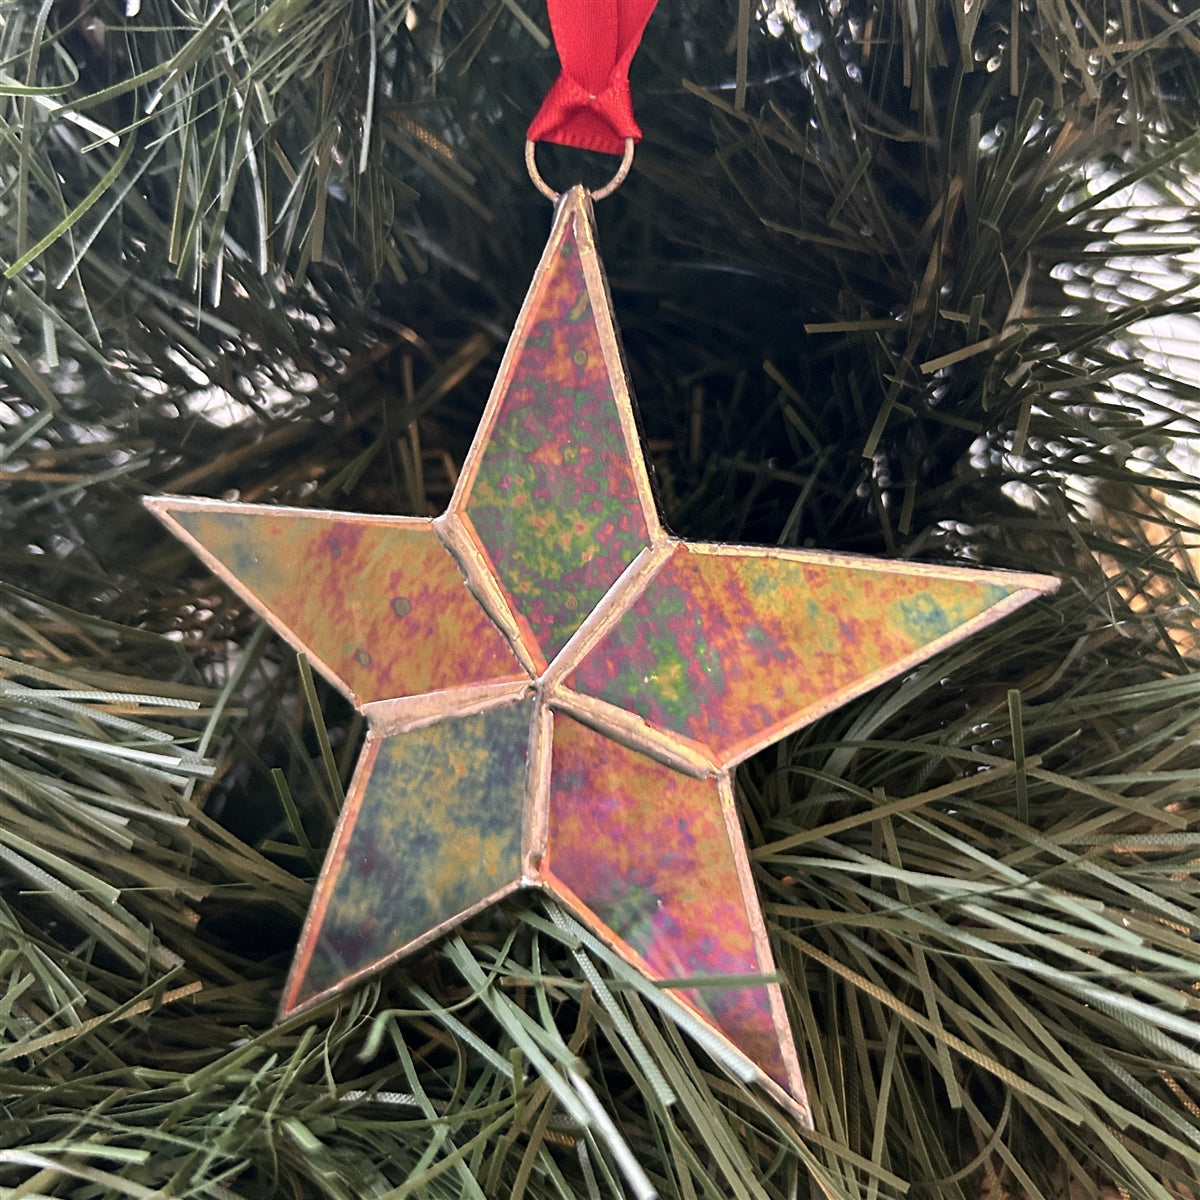 clear iridescent stained glass star with silver edging hanging from red satin ribbon